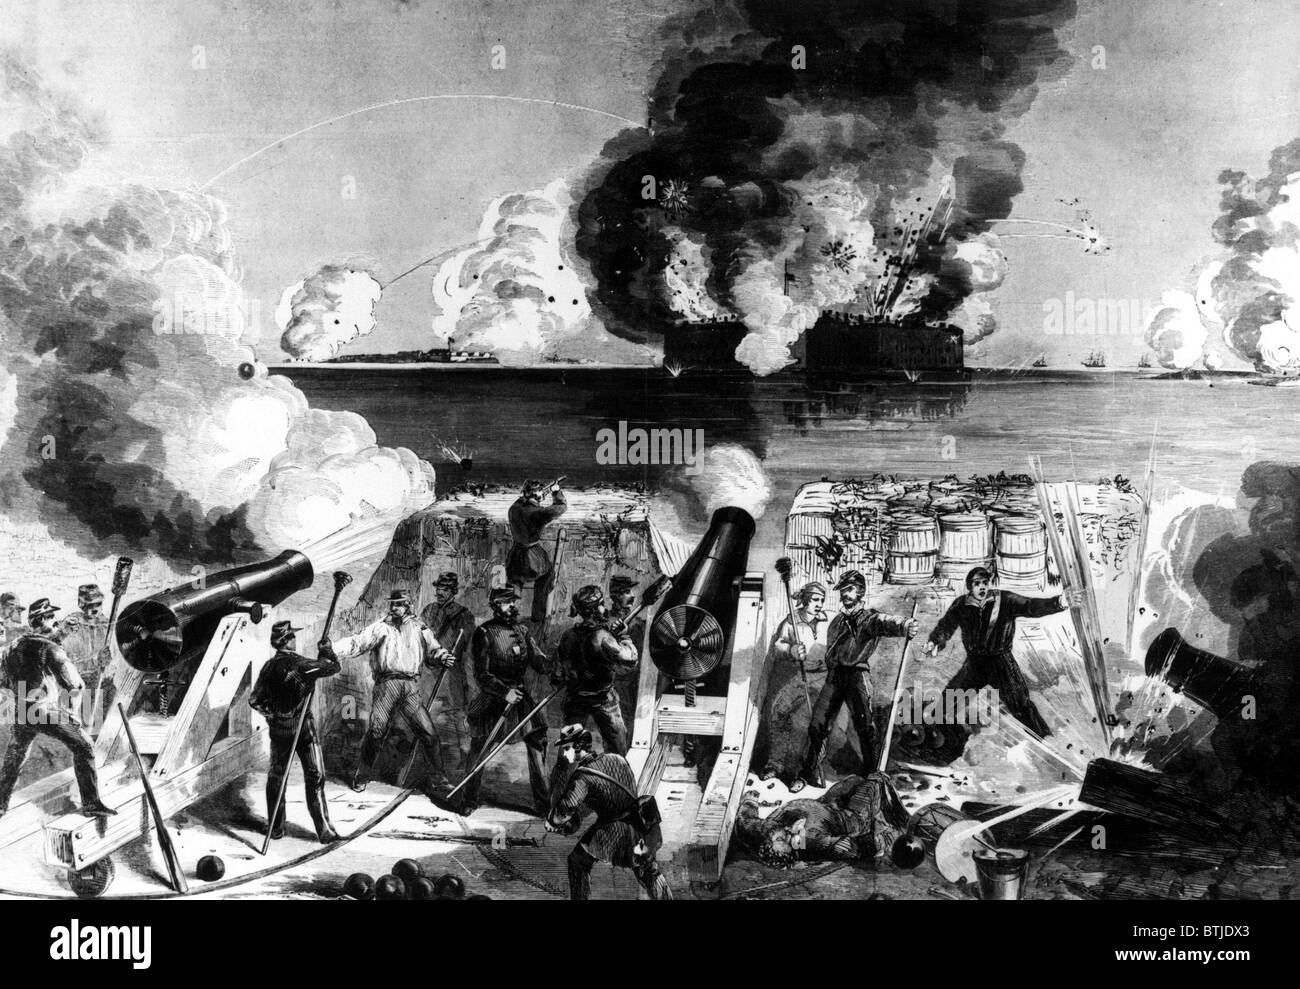 CIVIL WAR--Illustration of Fort Sumter in the harbor of Charleston, SC under Confederate attack on April 12 and 13, 1861. Stock Photo